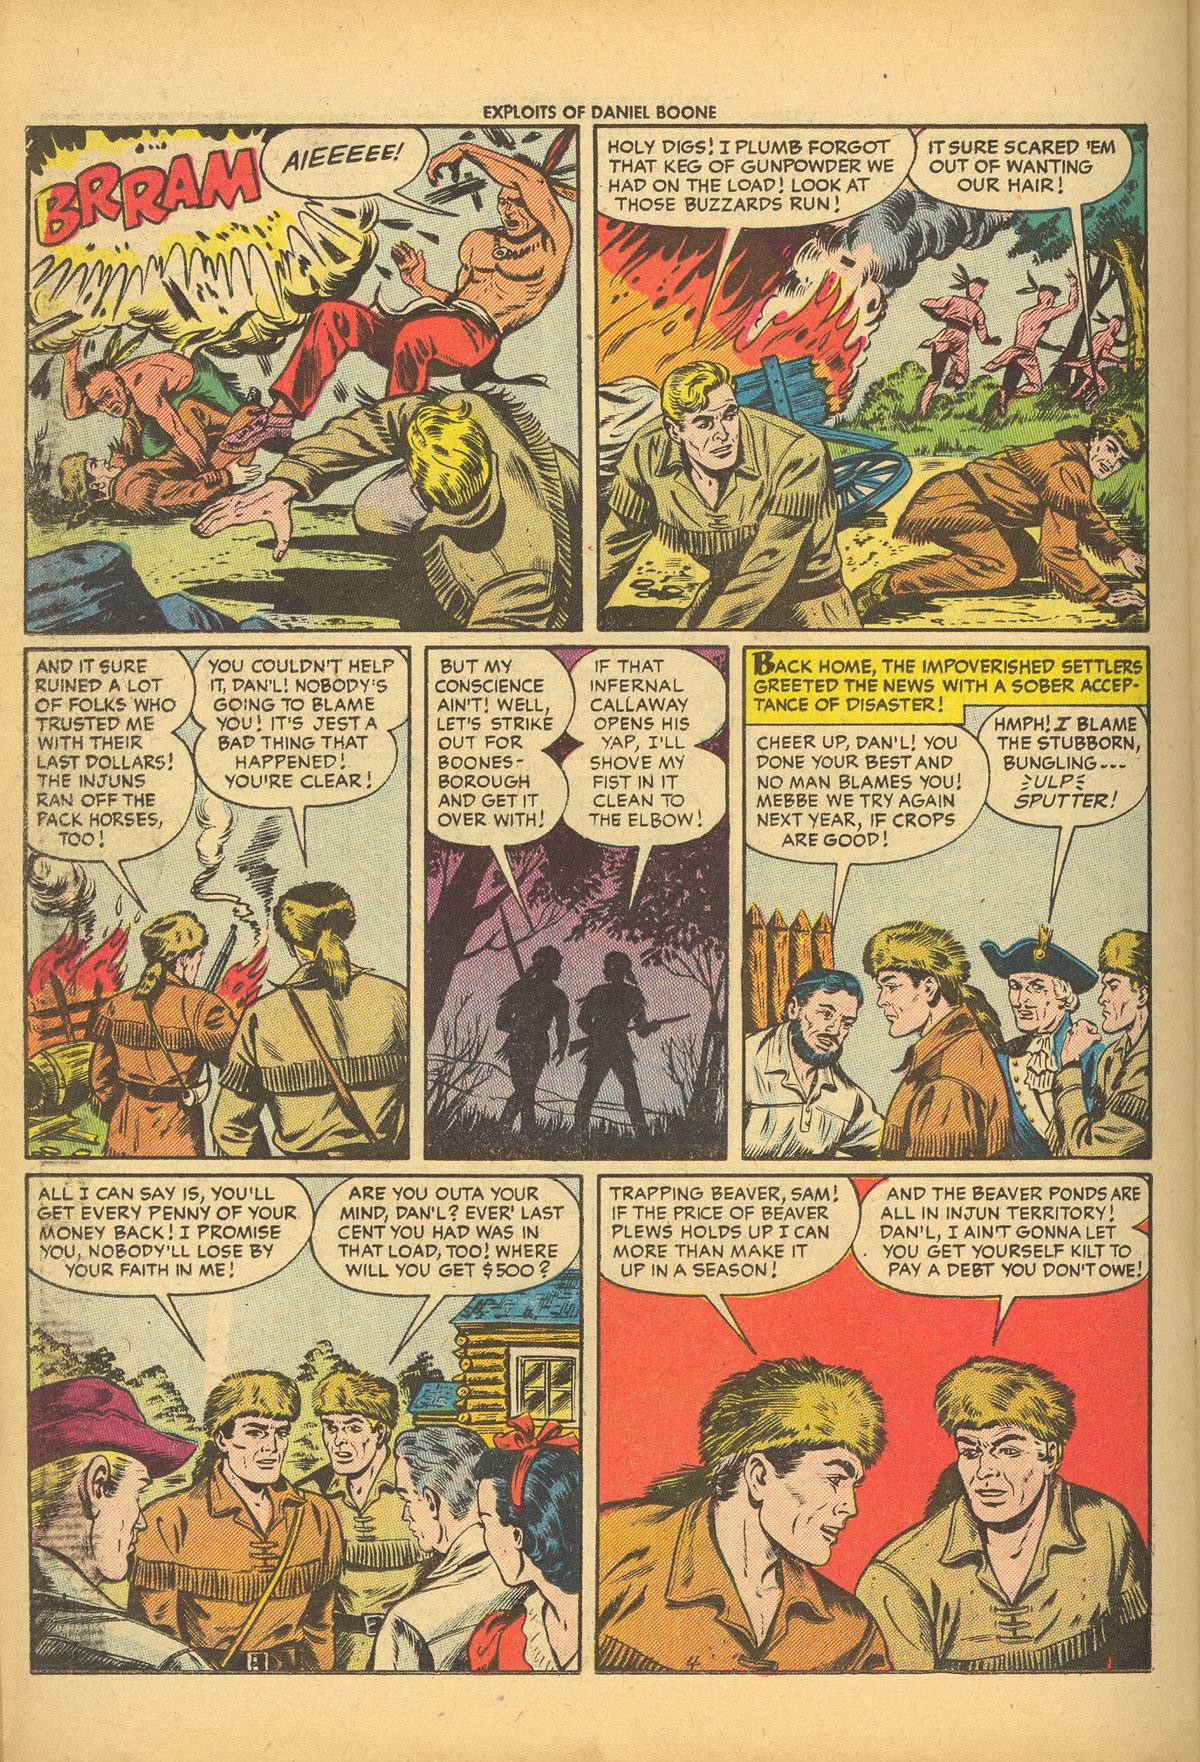 Read online Exploits of Daniel Boone comic -  Issue #3 - 22